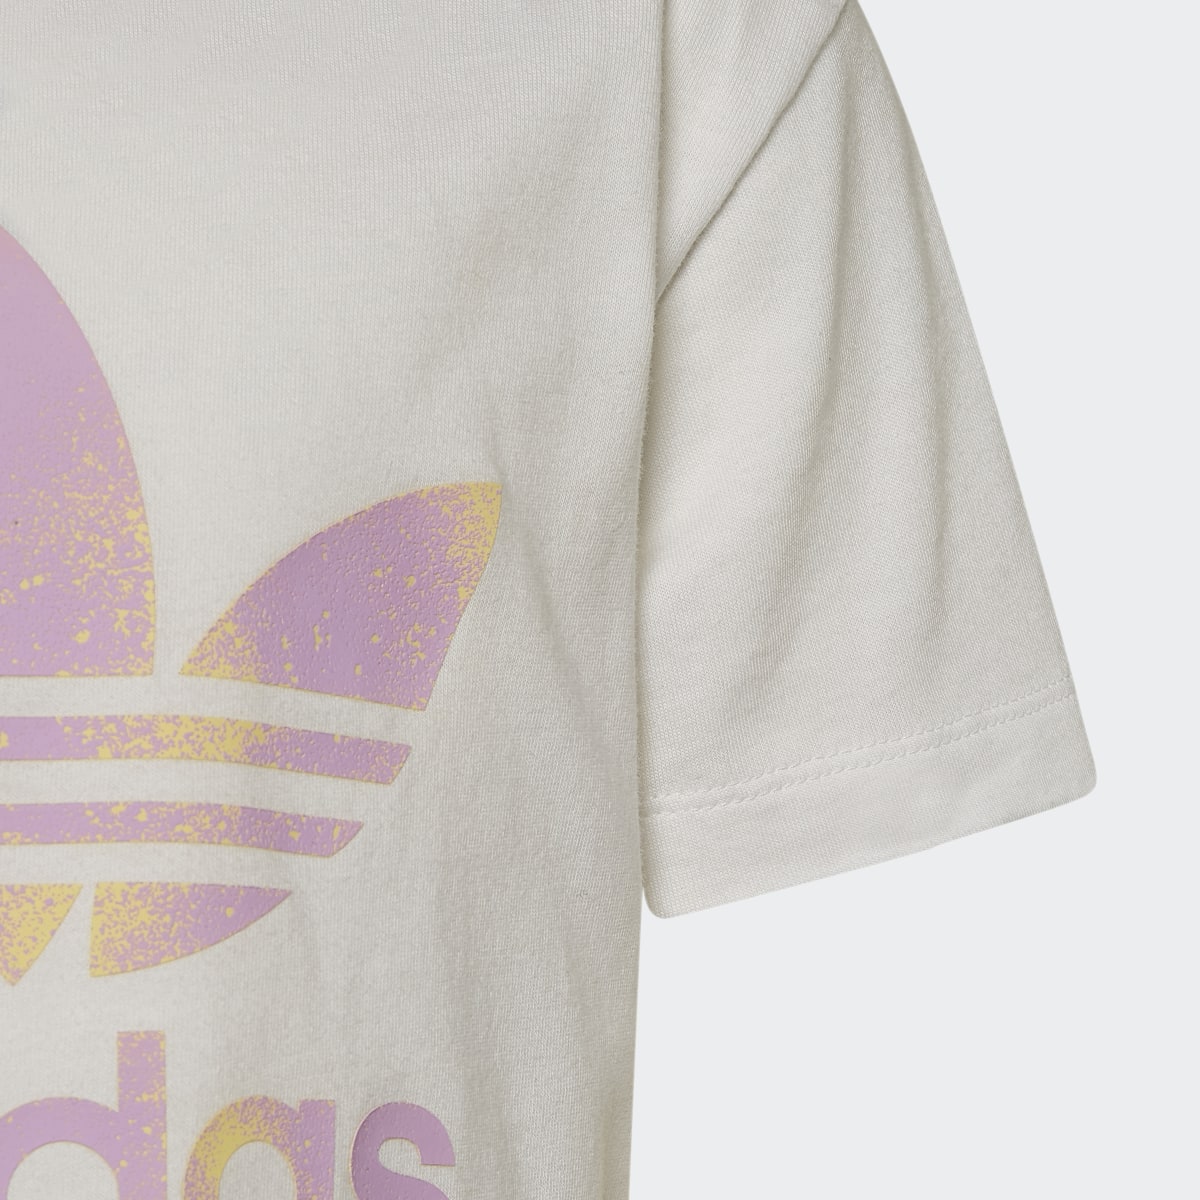 Adidas Completo Graphic Logo Shorts and Tee. 7